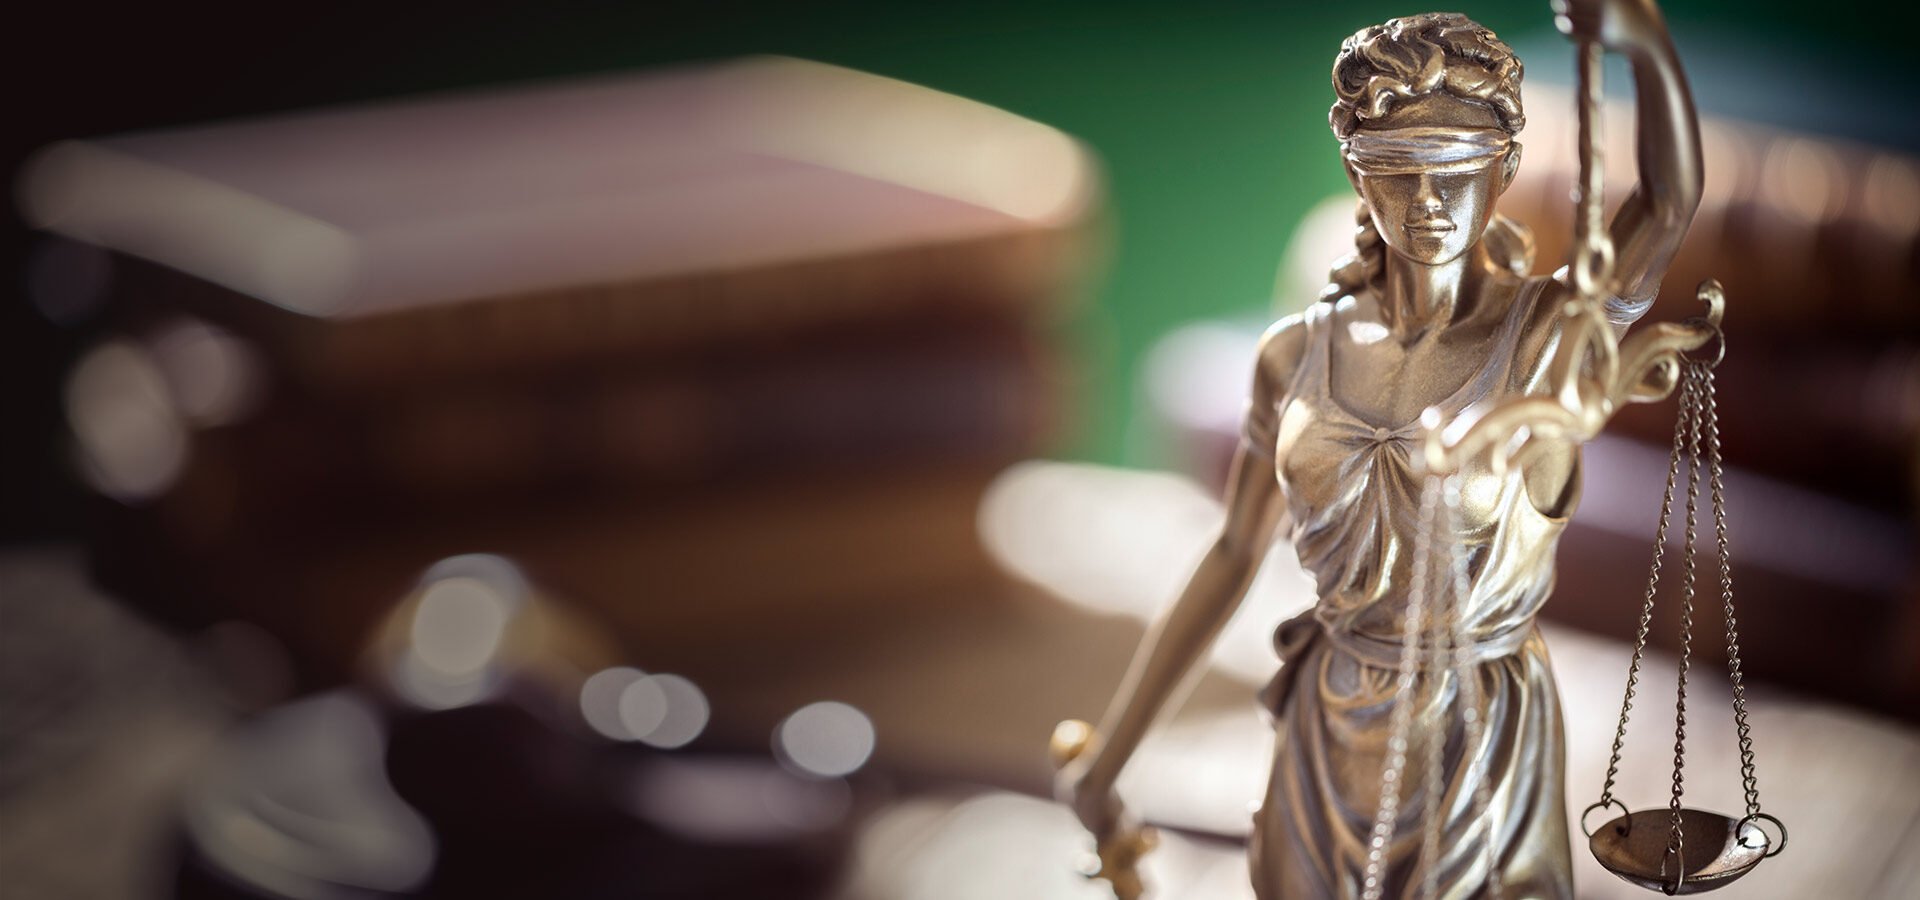 Image of Lady Justice - International Law and Politics